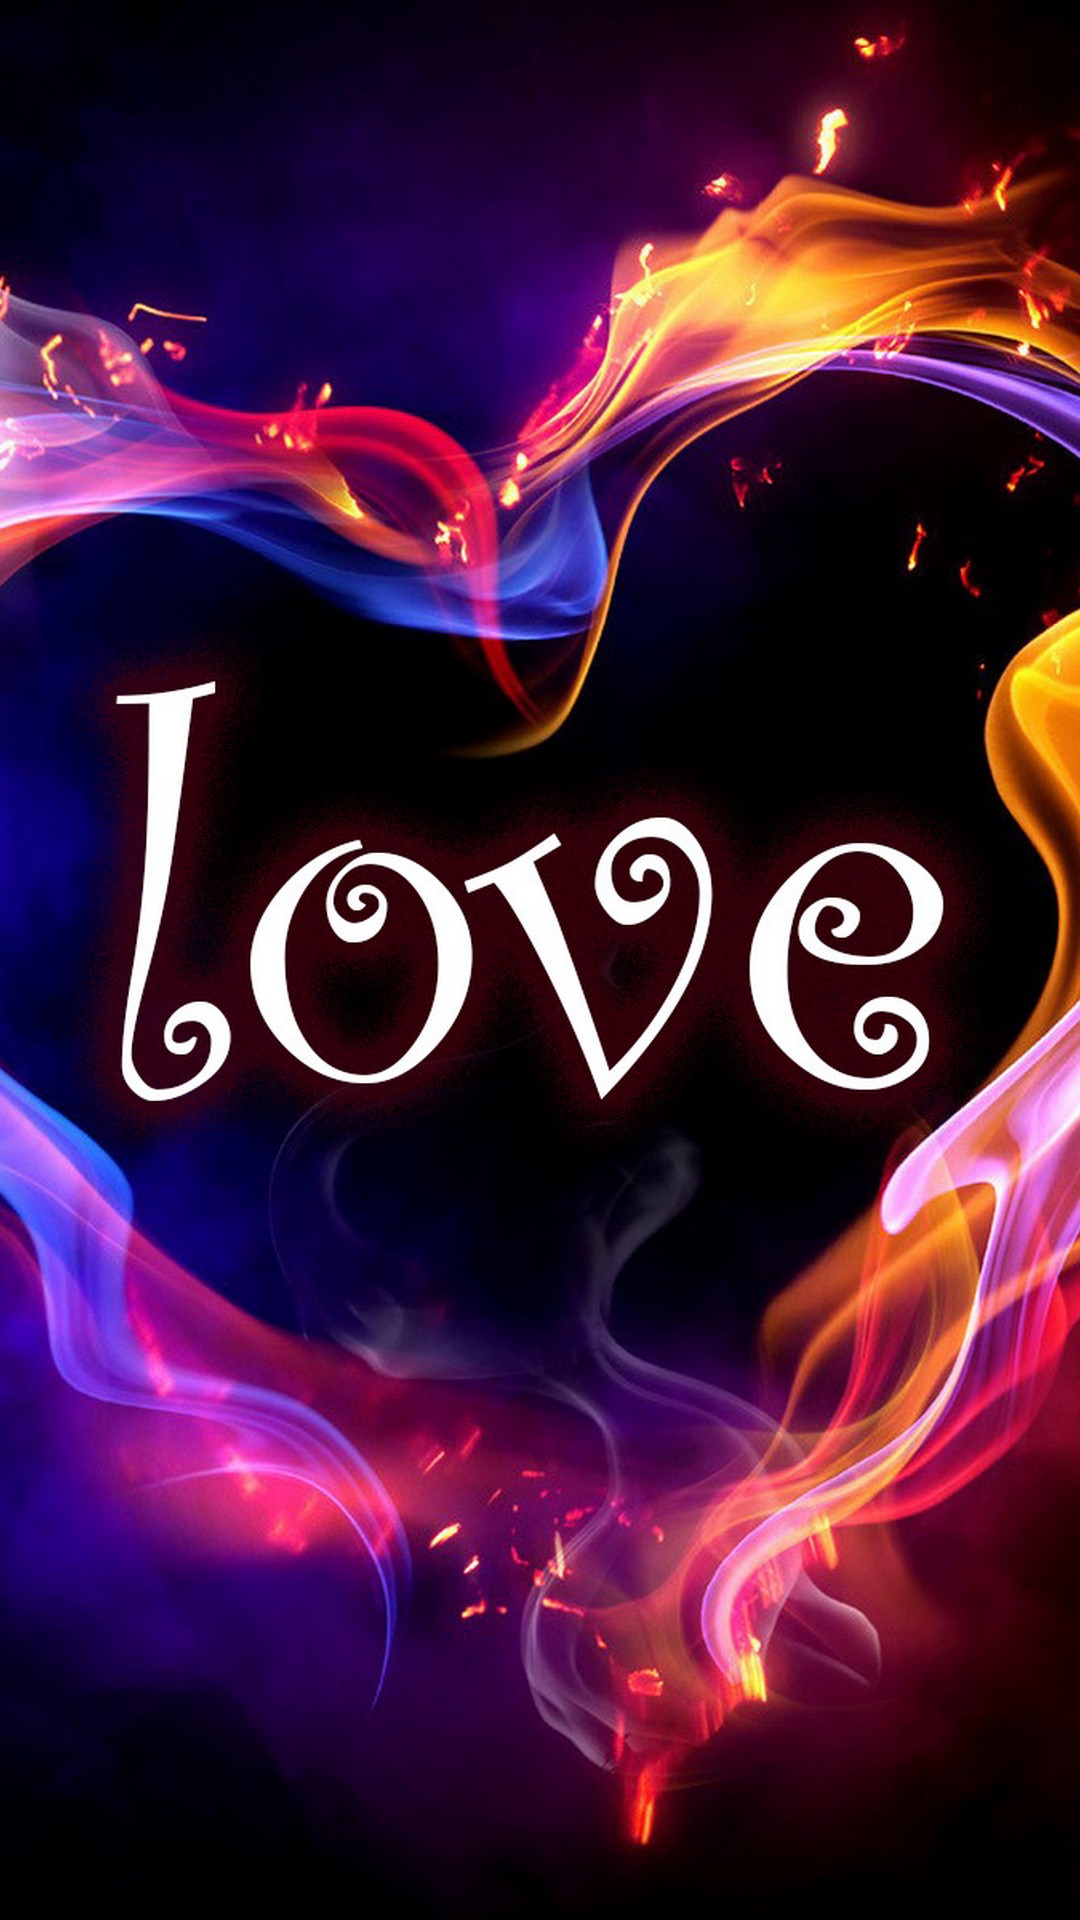 Love HD Wallpapers For Android   2020 Android Wallpapers